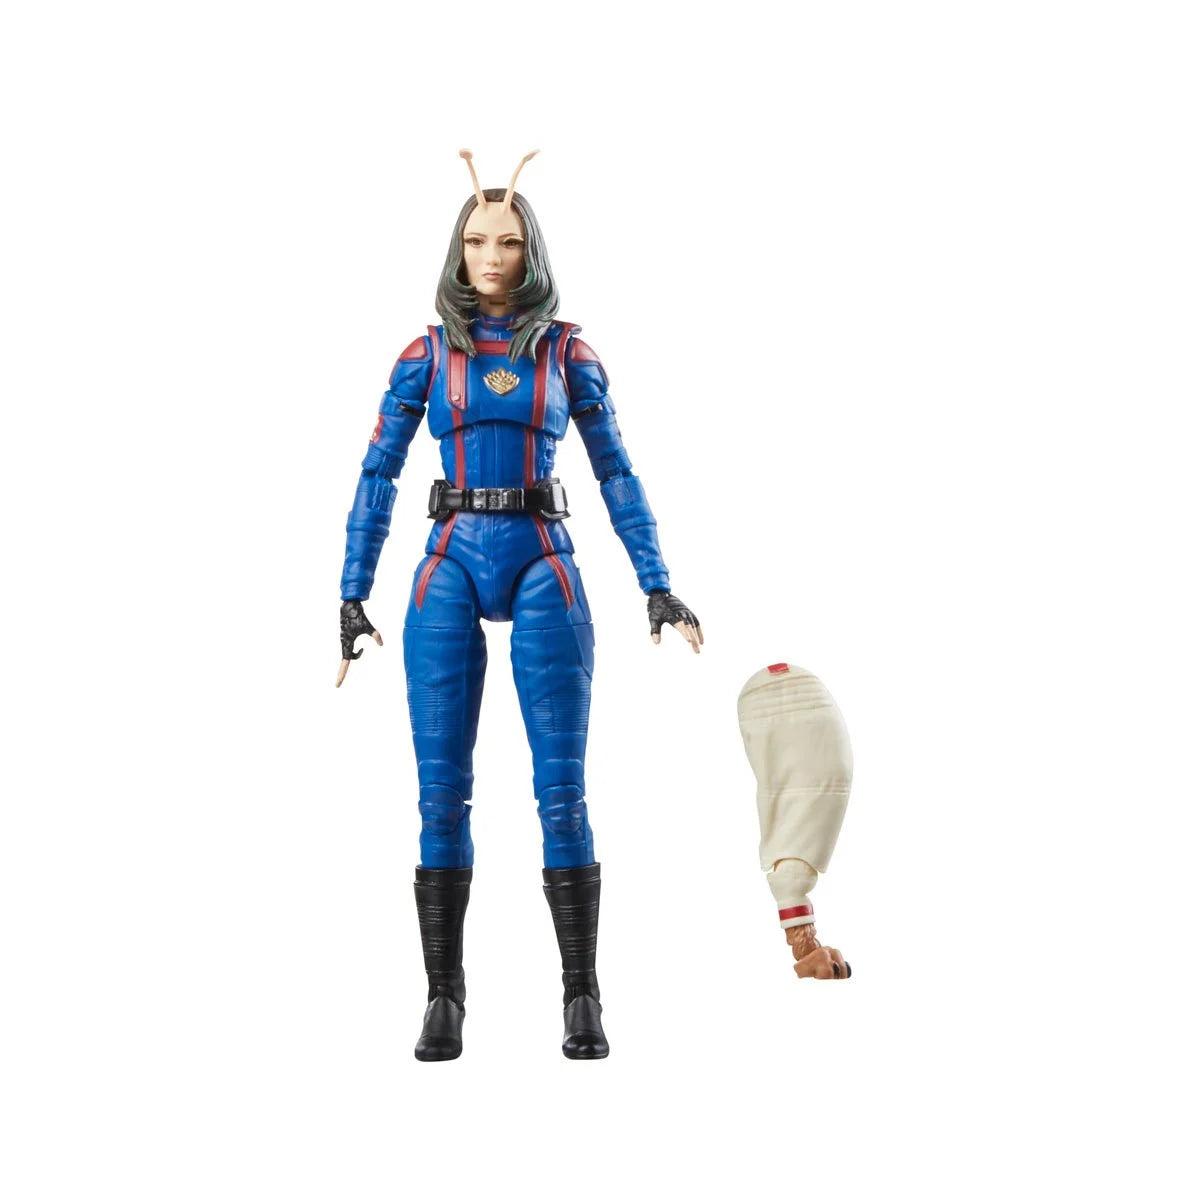 Guardians of the Galaxy Vol. 3 Marvel Legends Mantis 6-Inch Action Figure